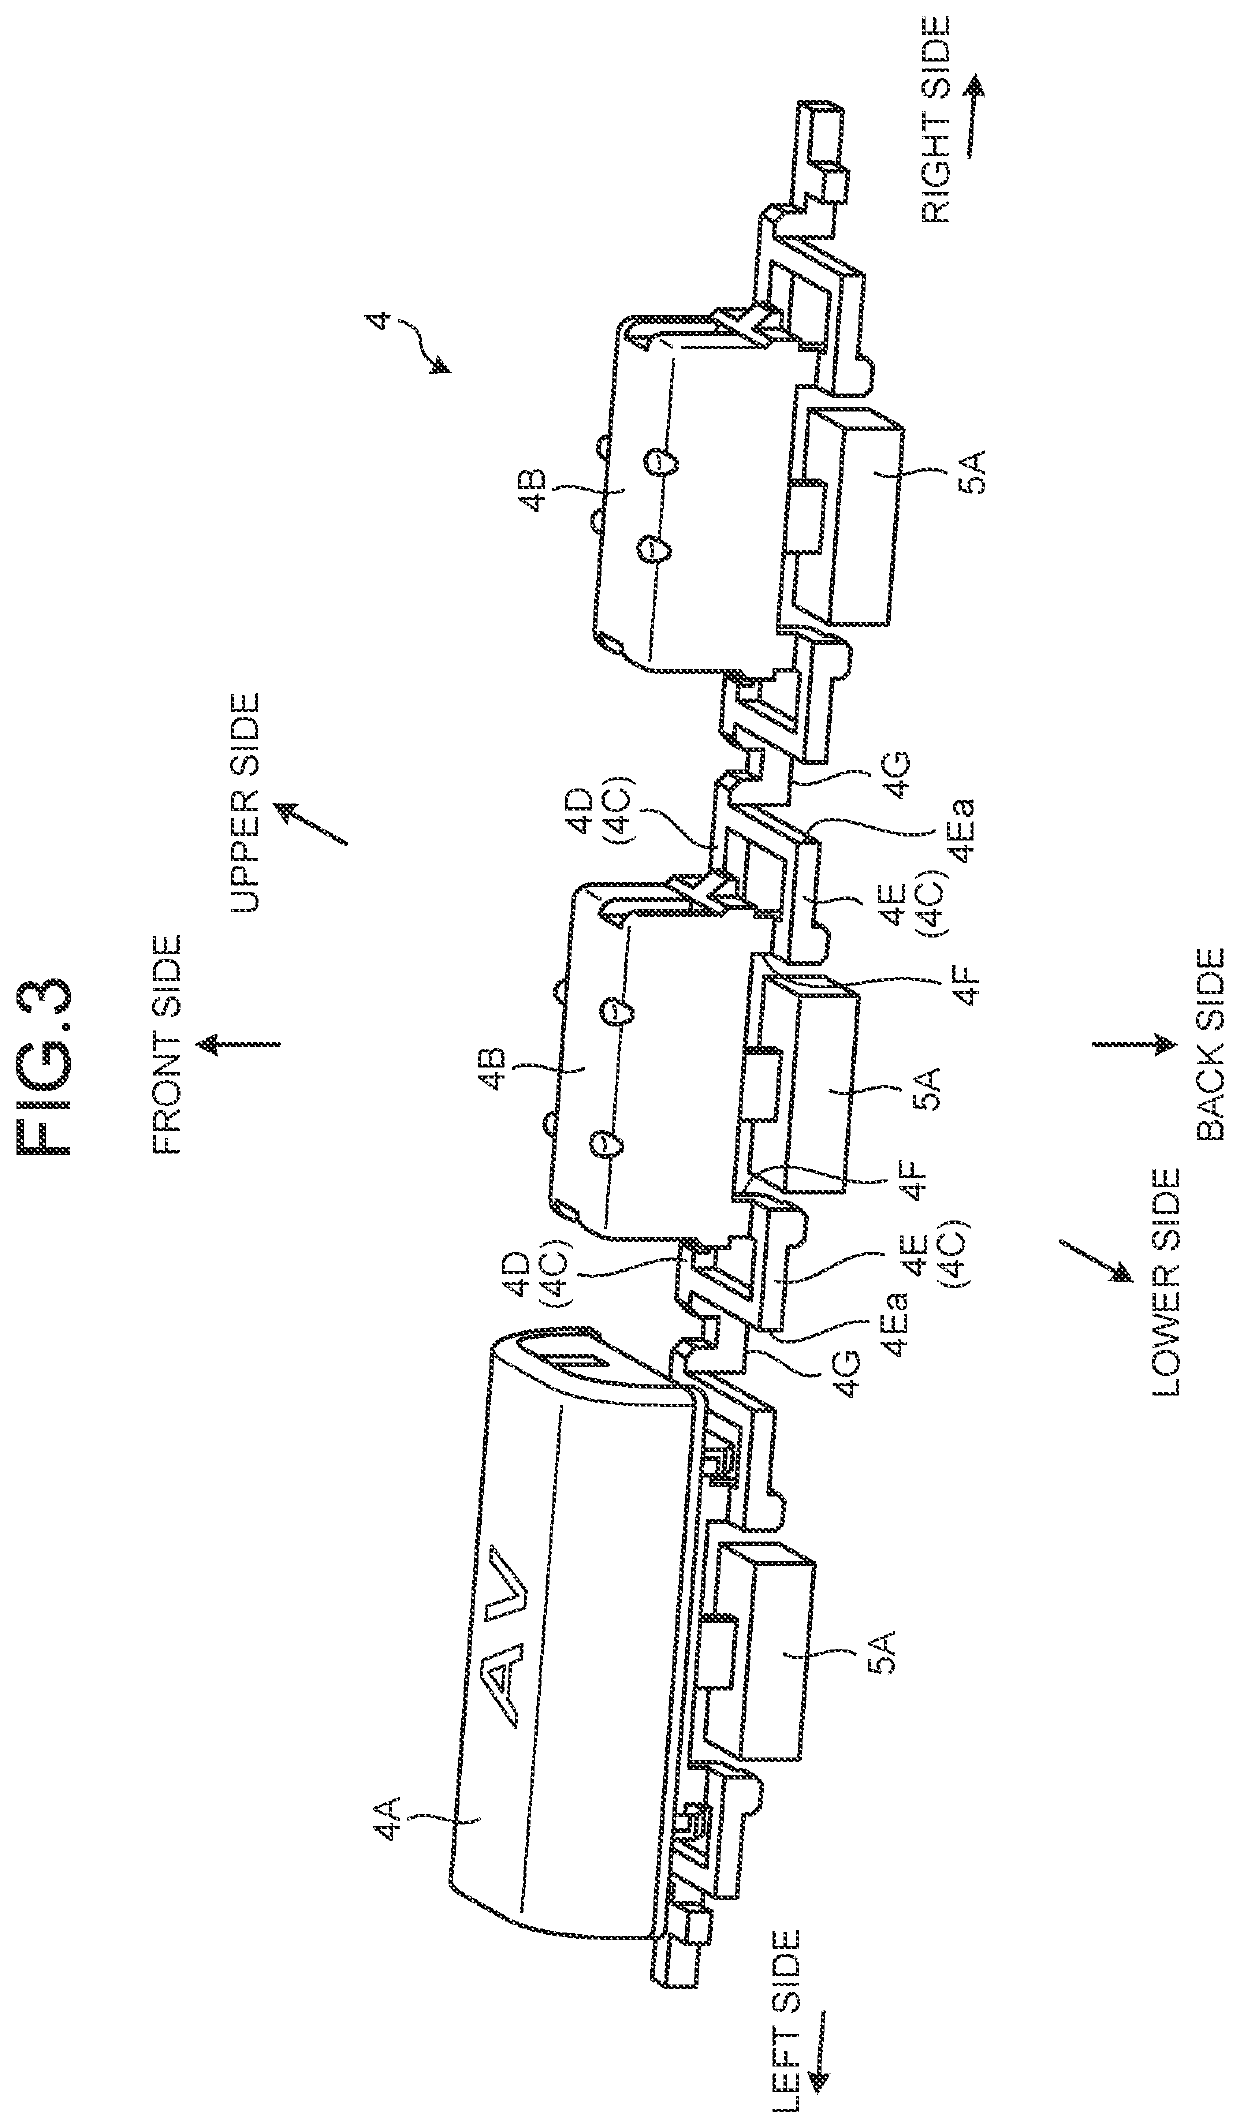 Hinge structure of button and electronic device